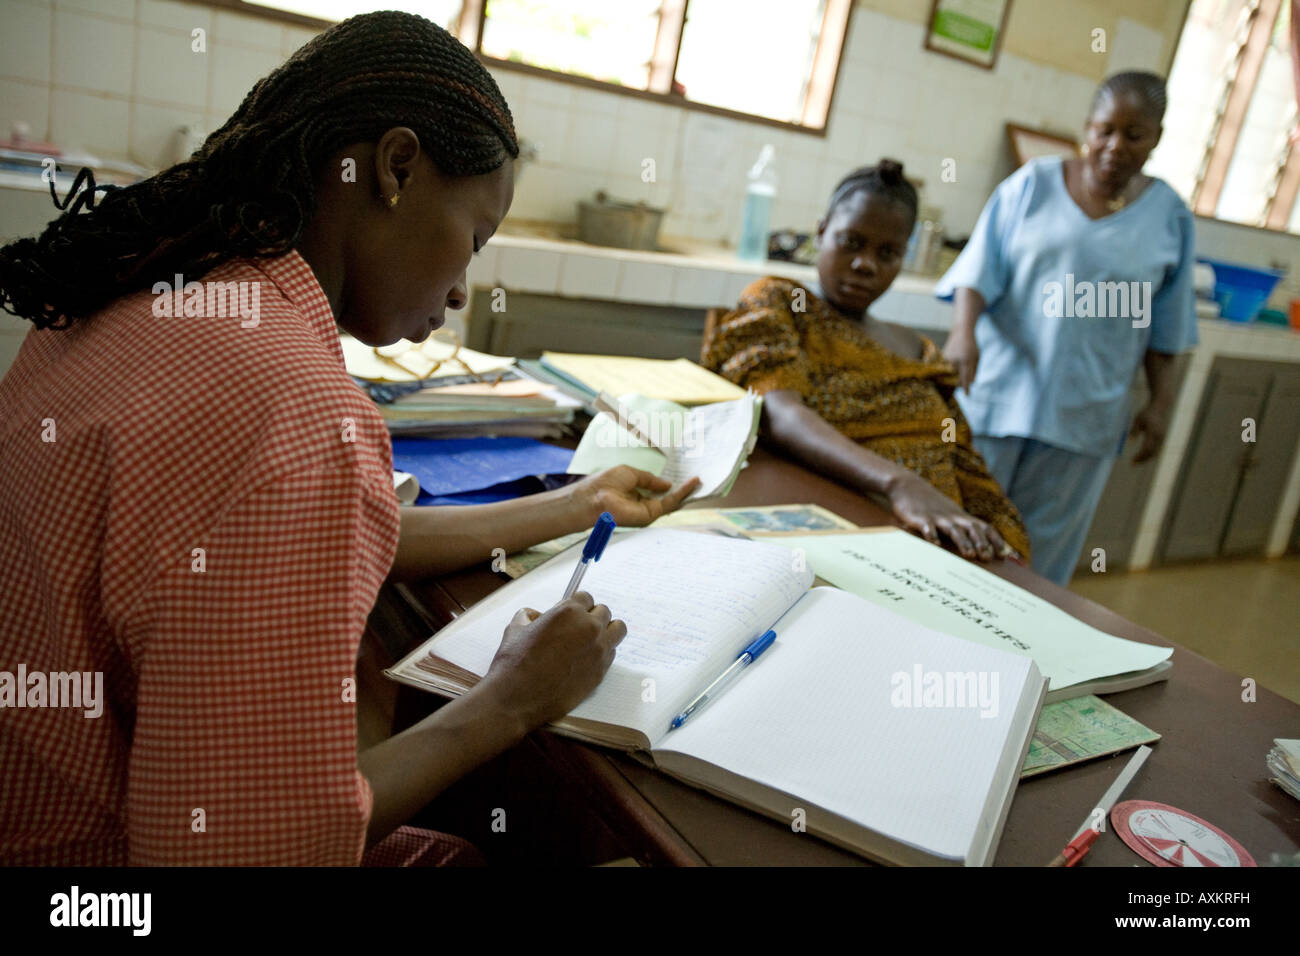 A health worker fills in a registry with medical information during a consultation with a pregnant woman, Benin, Africa Stock Photo